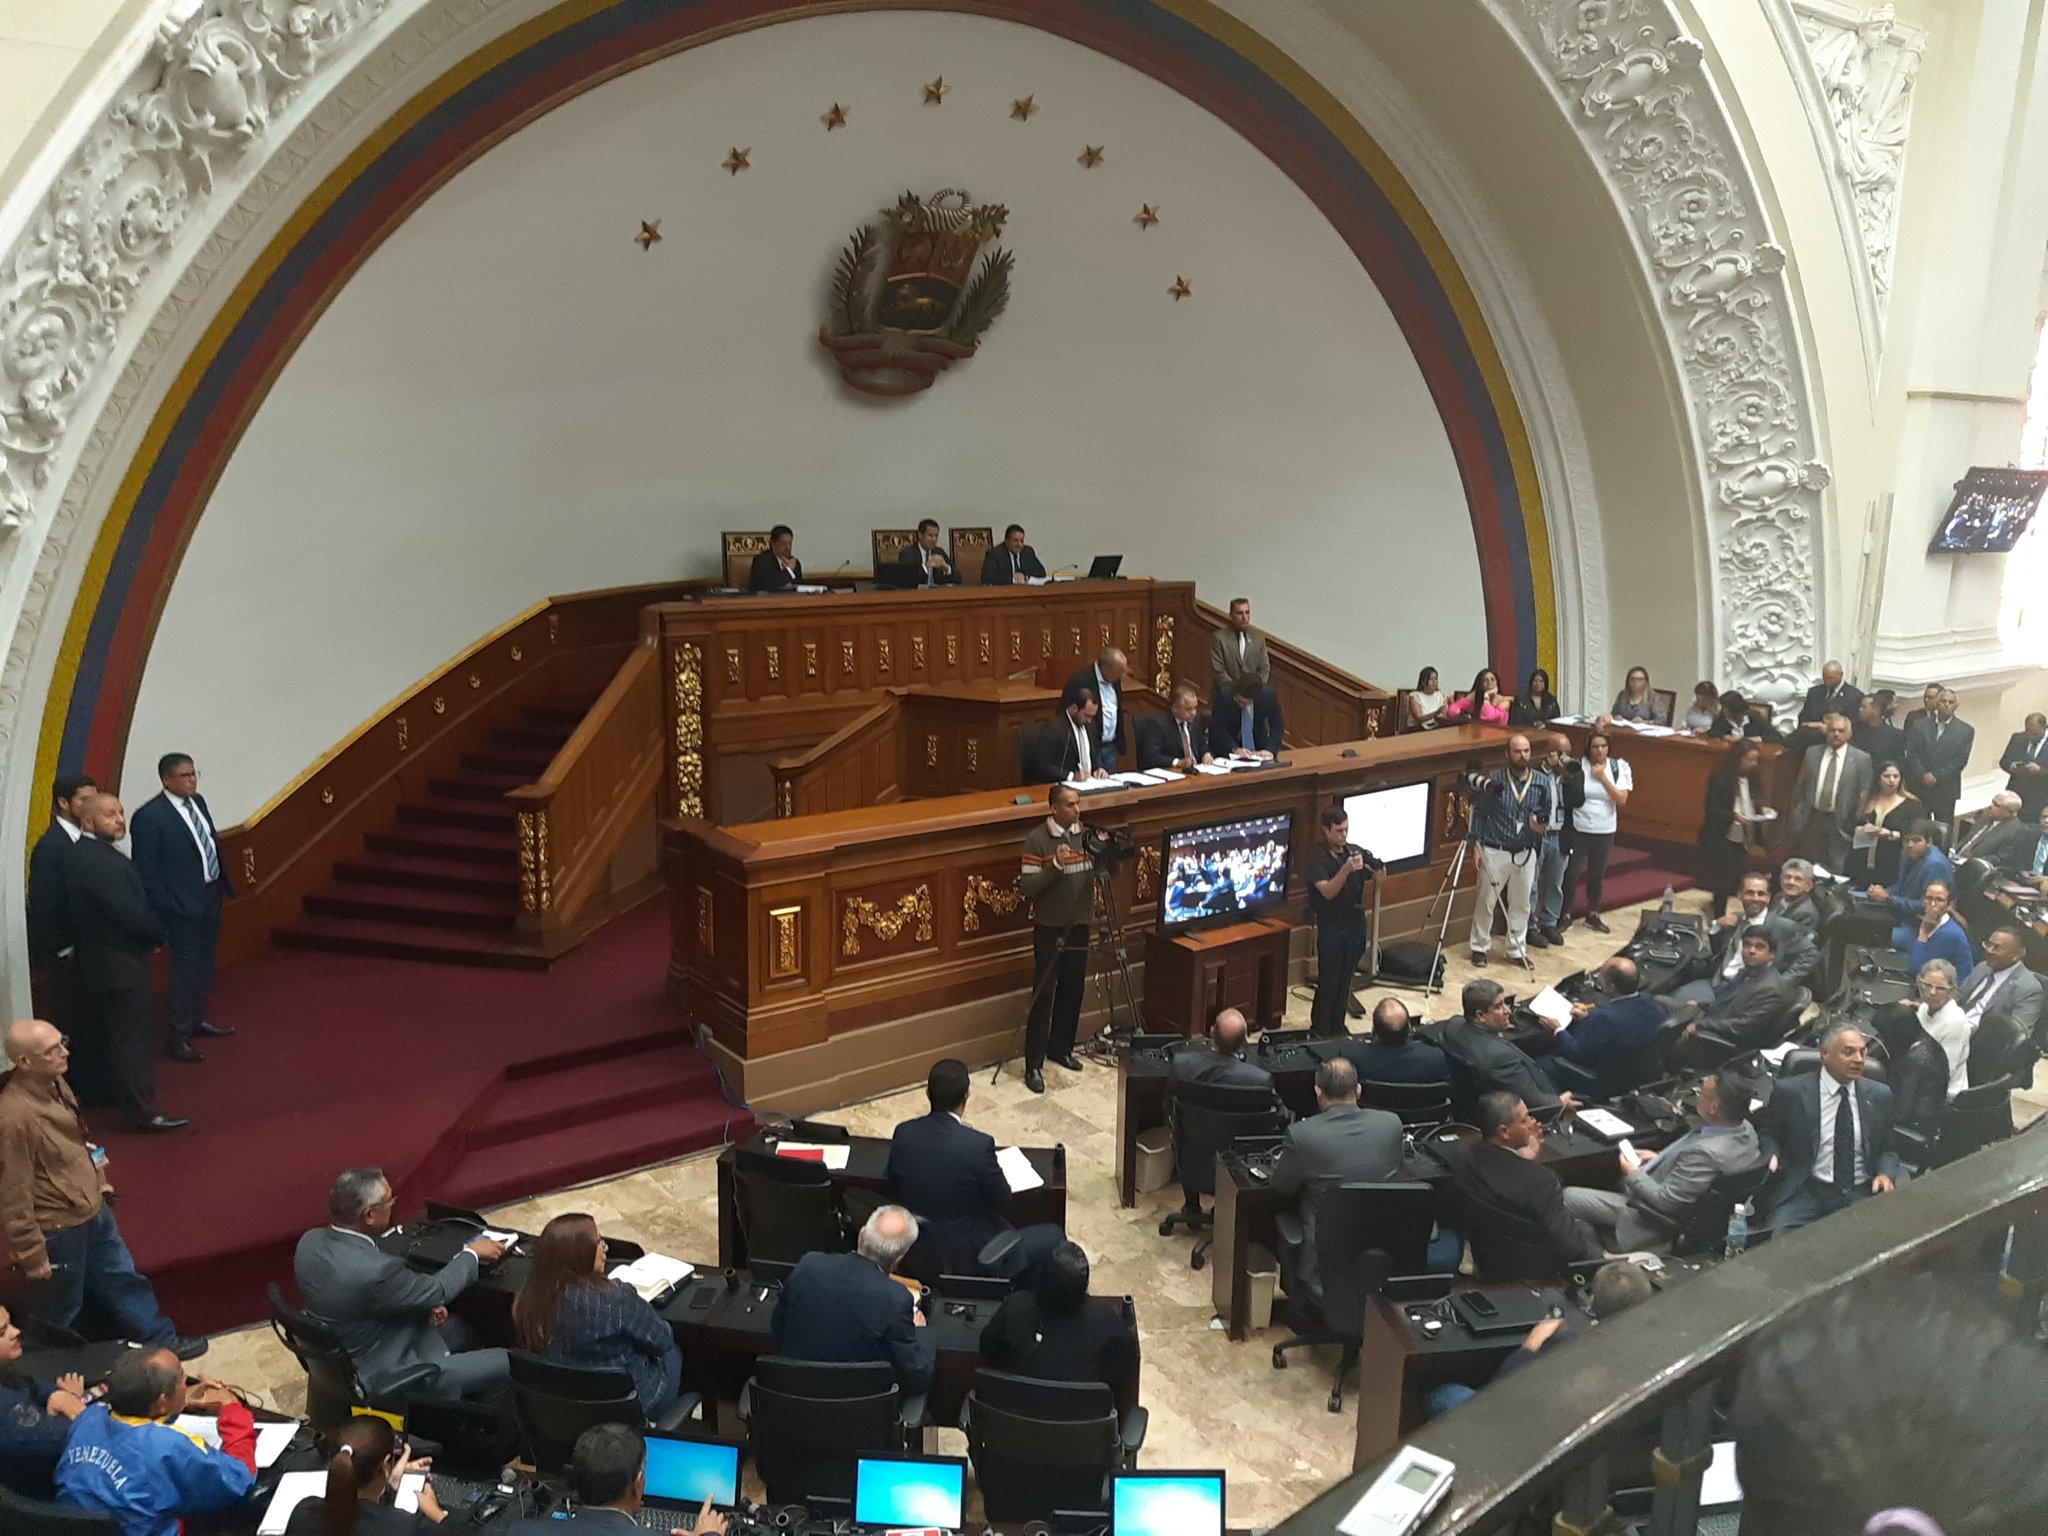 Chavista and opposition lawmakers sitting together for the first time since 2017